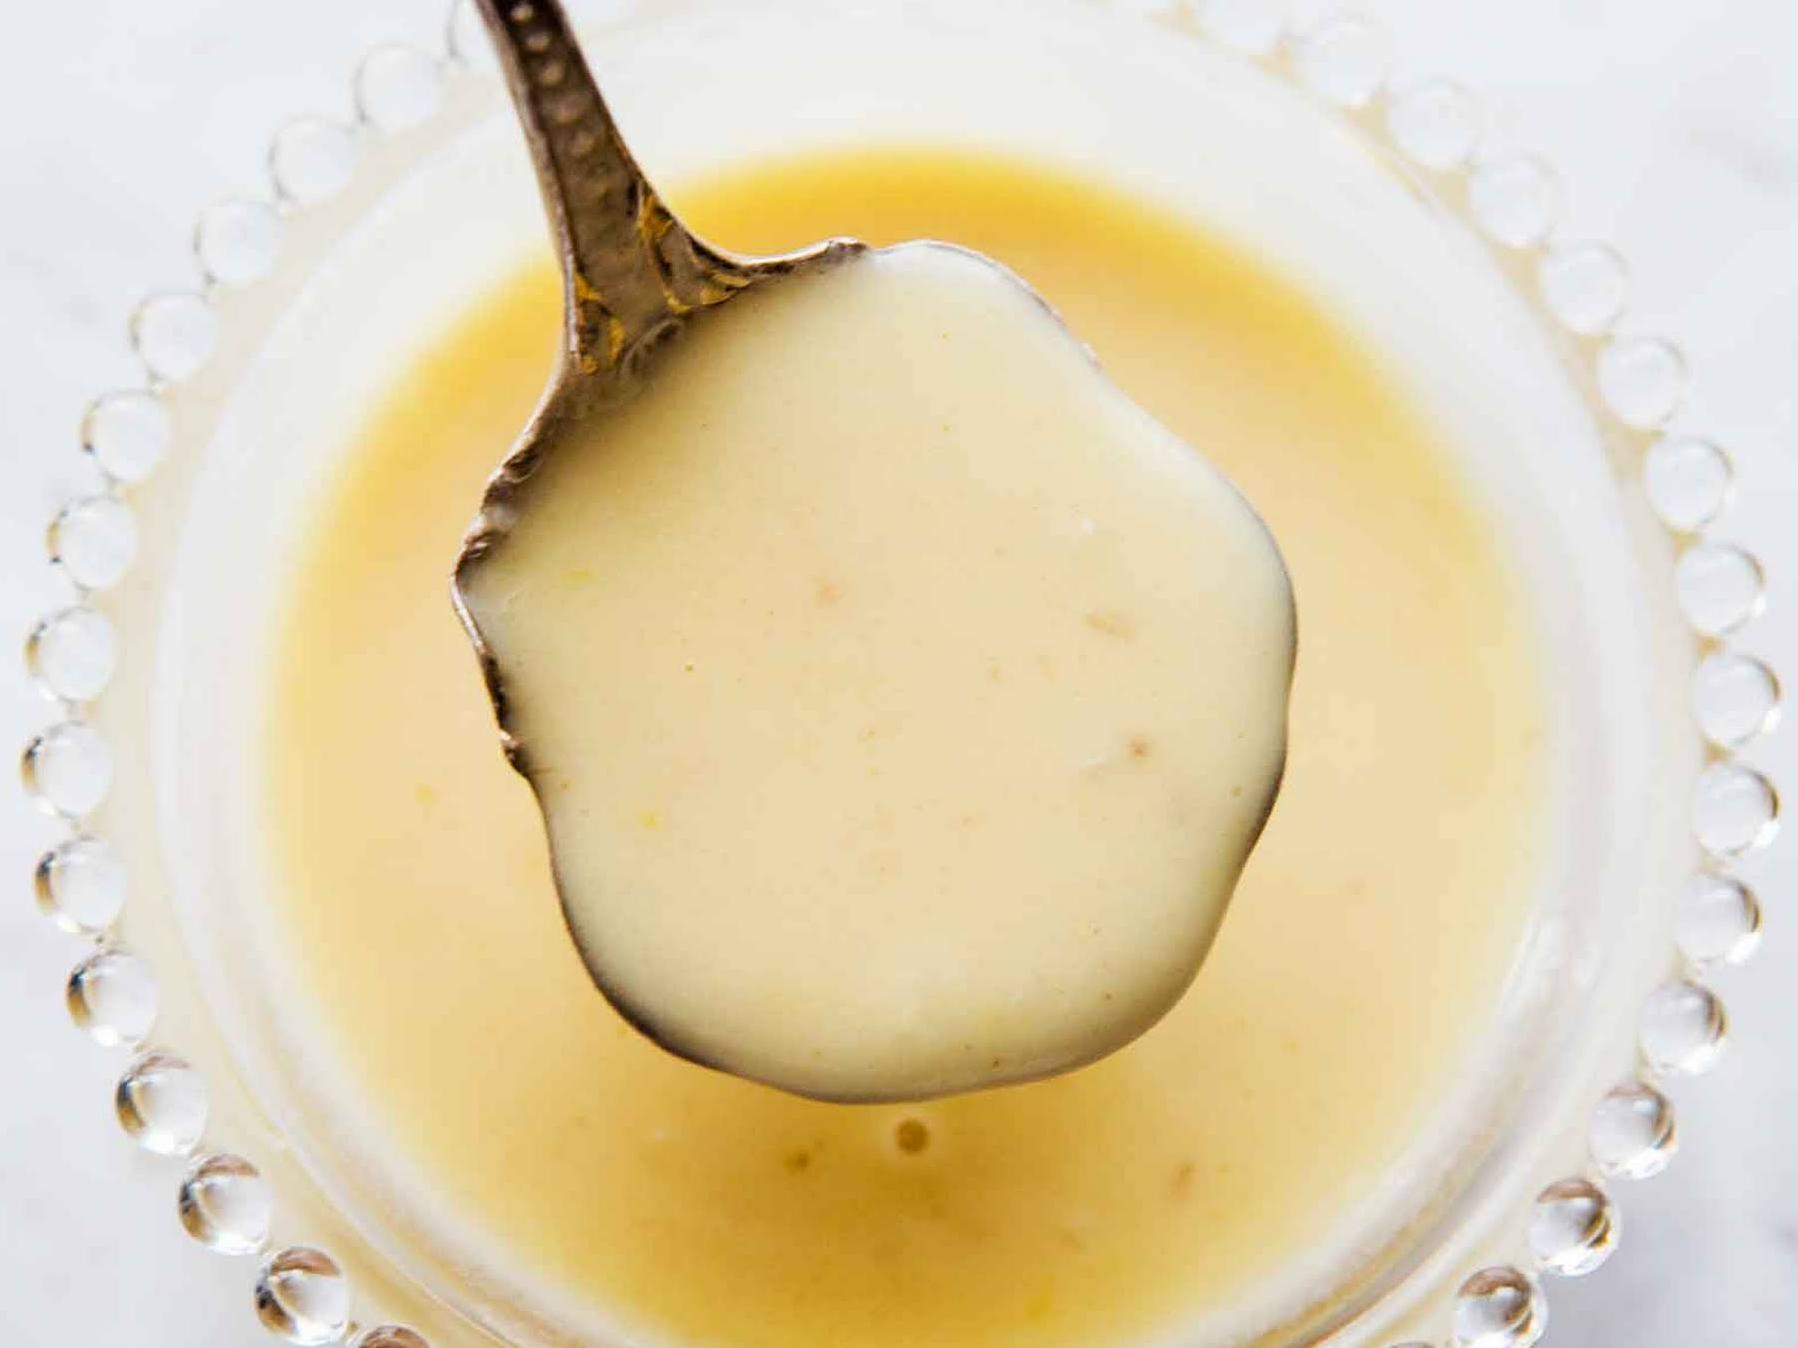  Toast to good food: champagne sauce complements a range of flavors